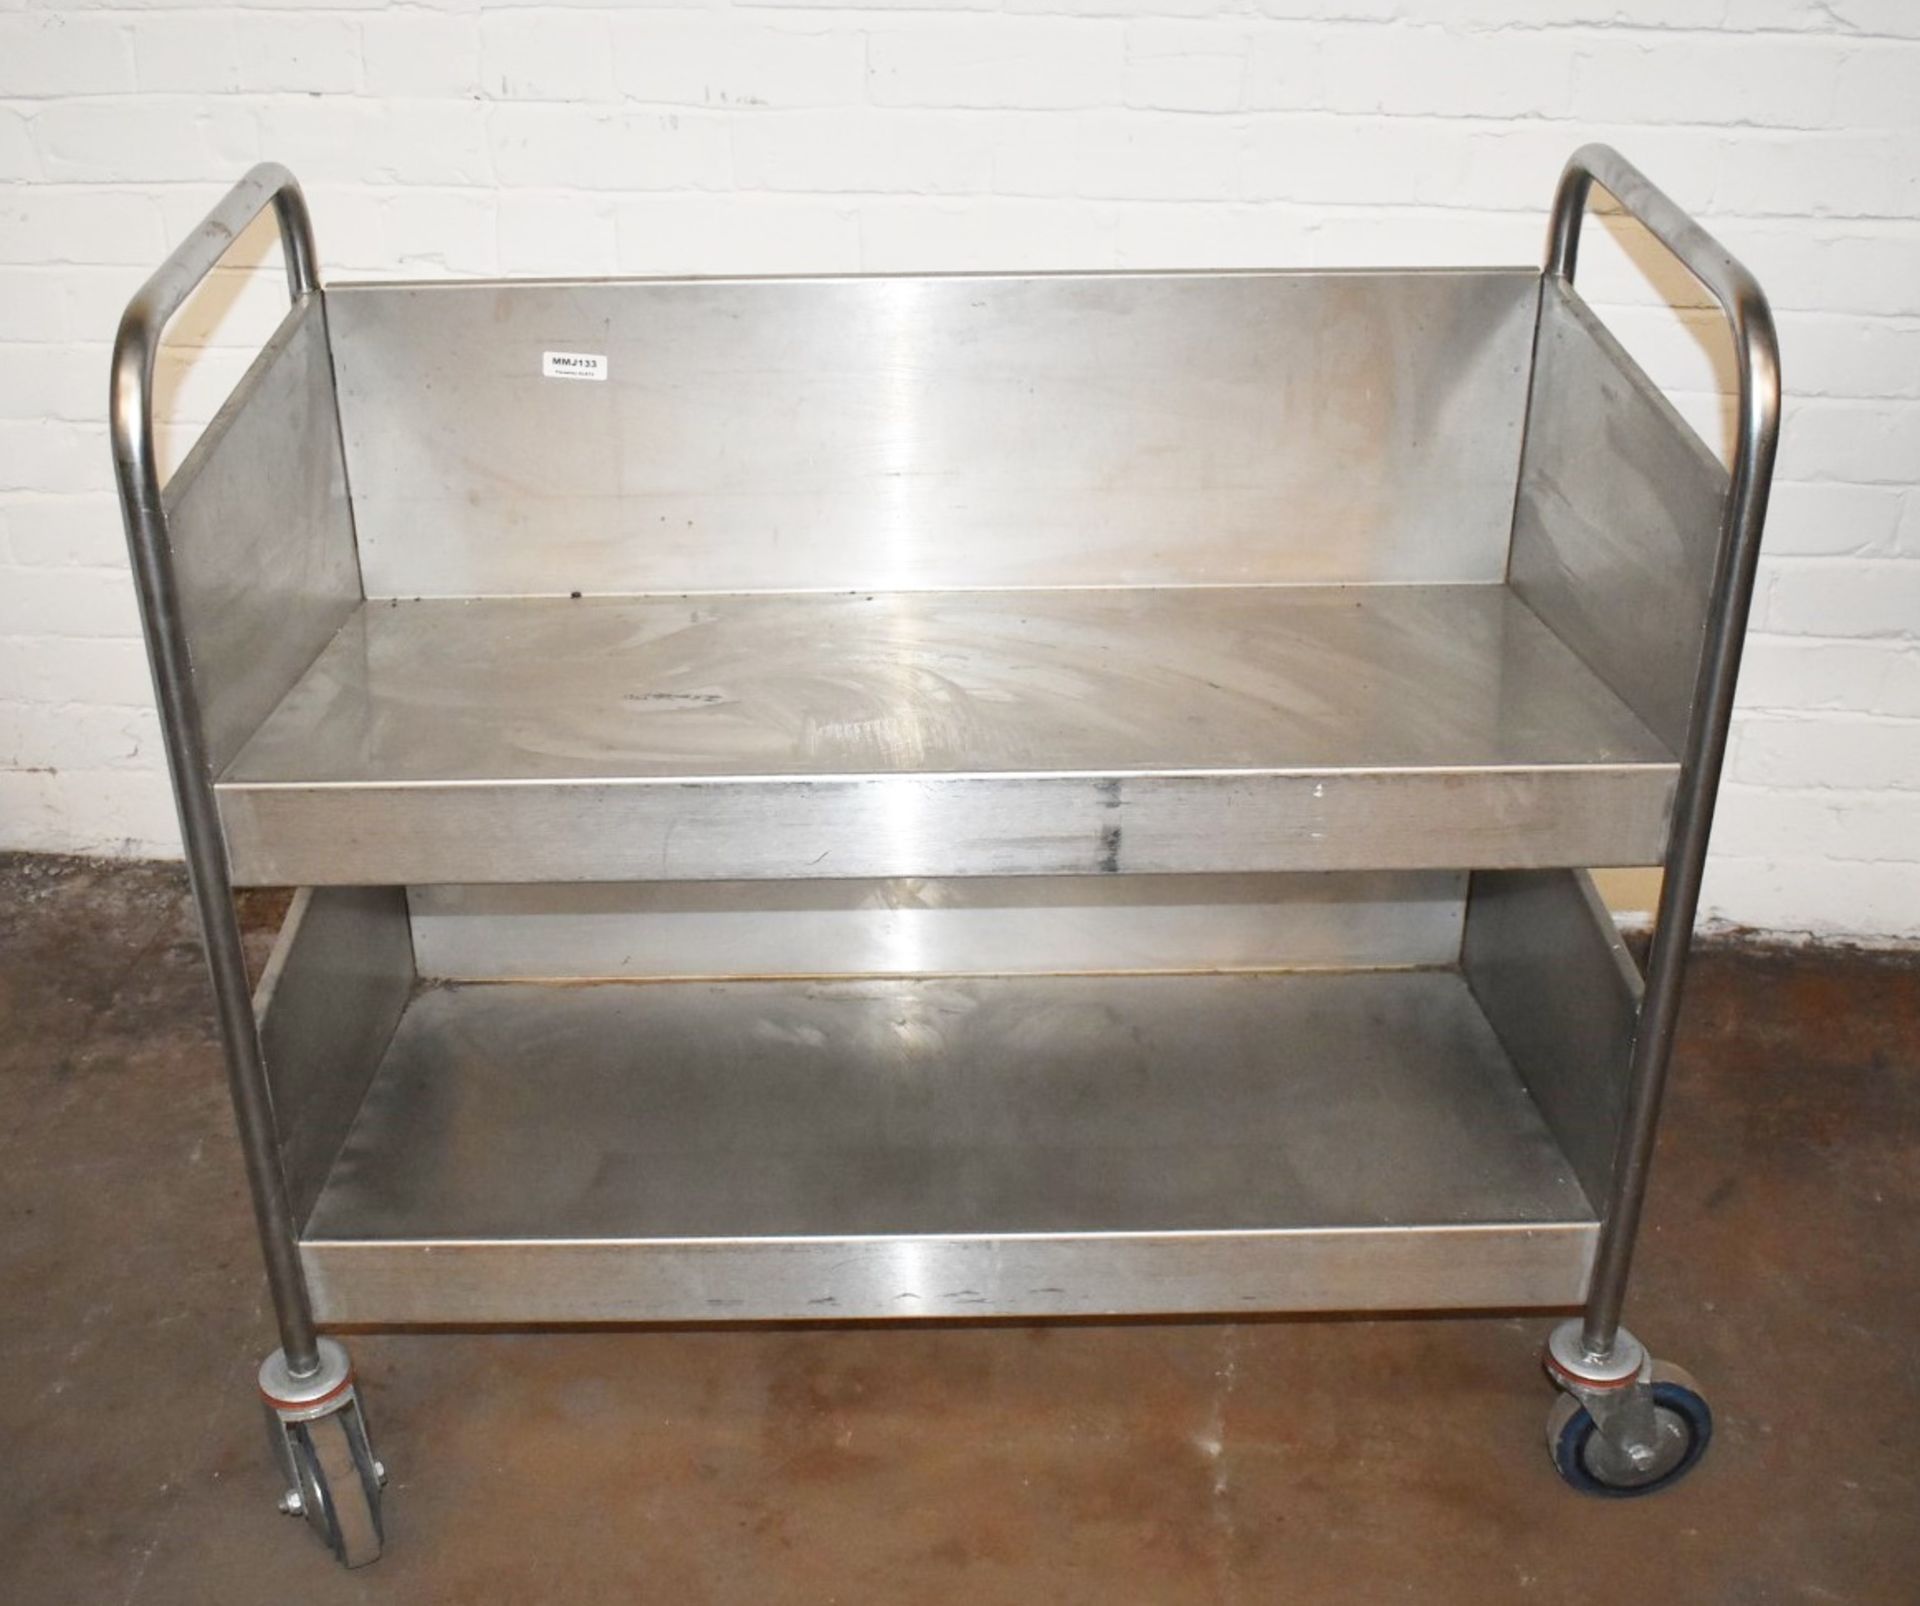 1 x Stainless Steel Trolley With Slanting Shelves and Heavy Duty Castors - Dimensions: H98 x W103 - Image 2 of 6